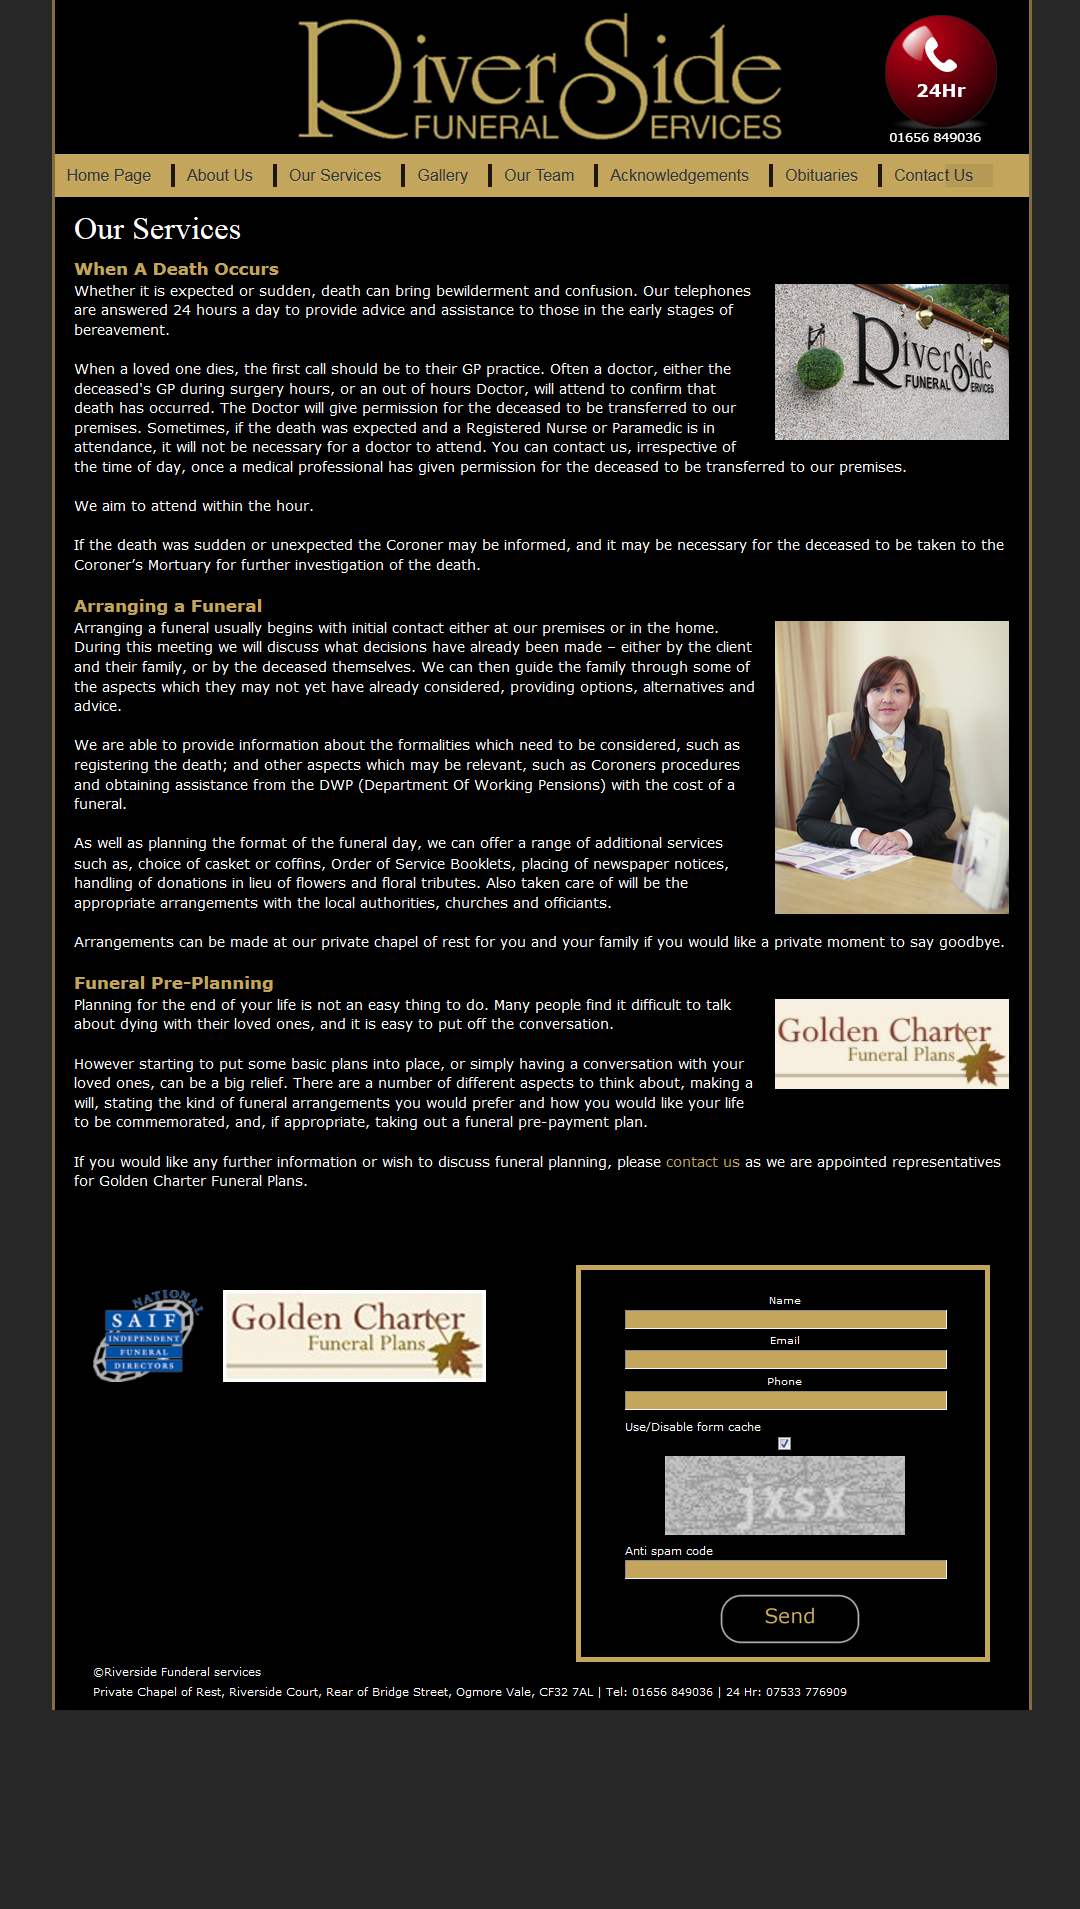 An image from Riverside Funeral Services Website